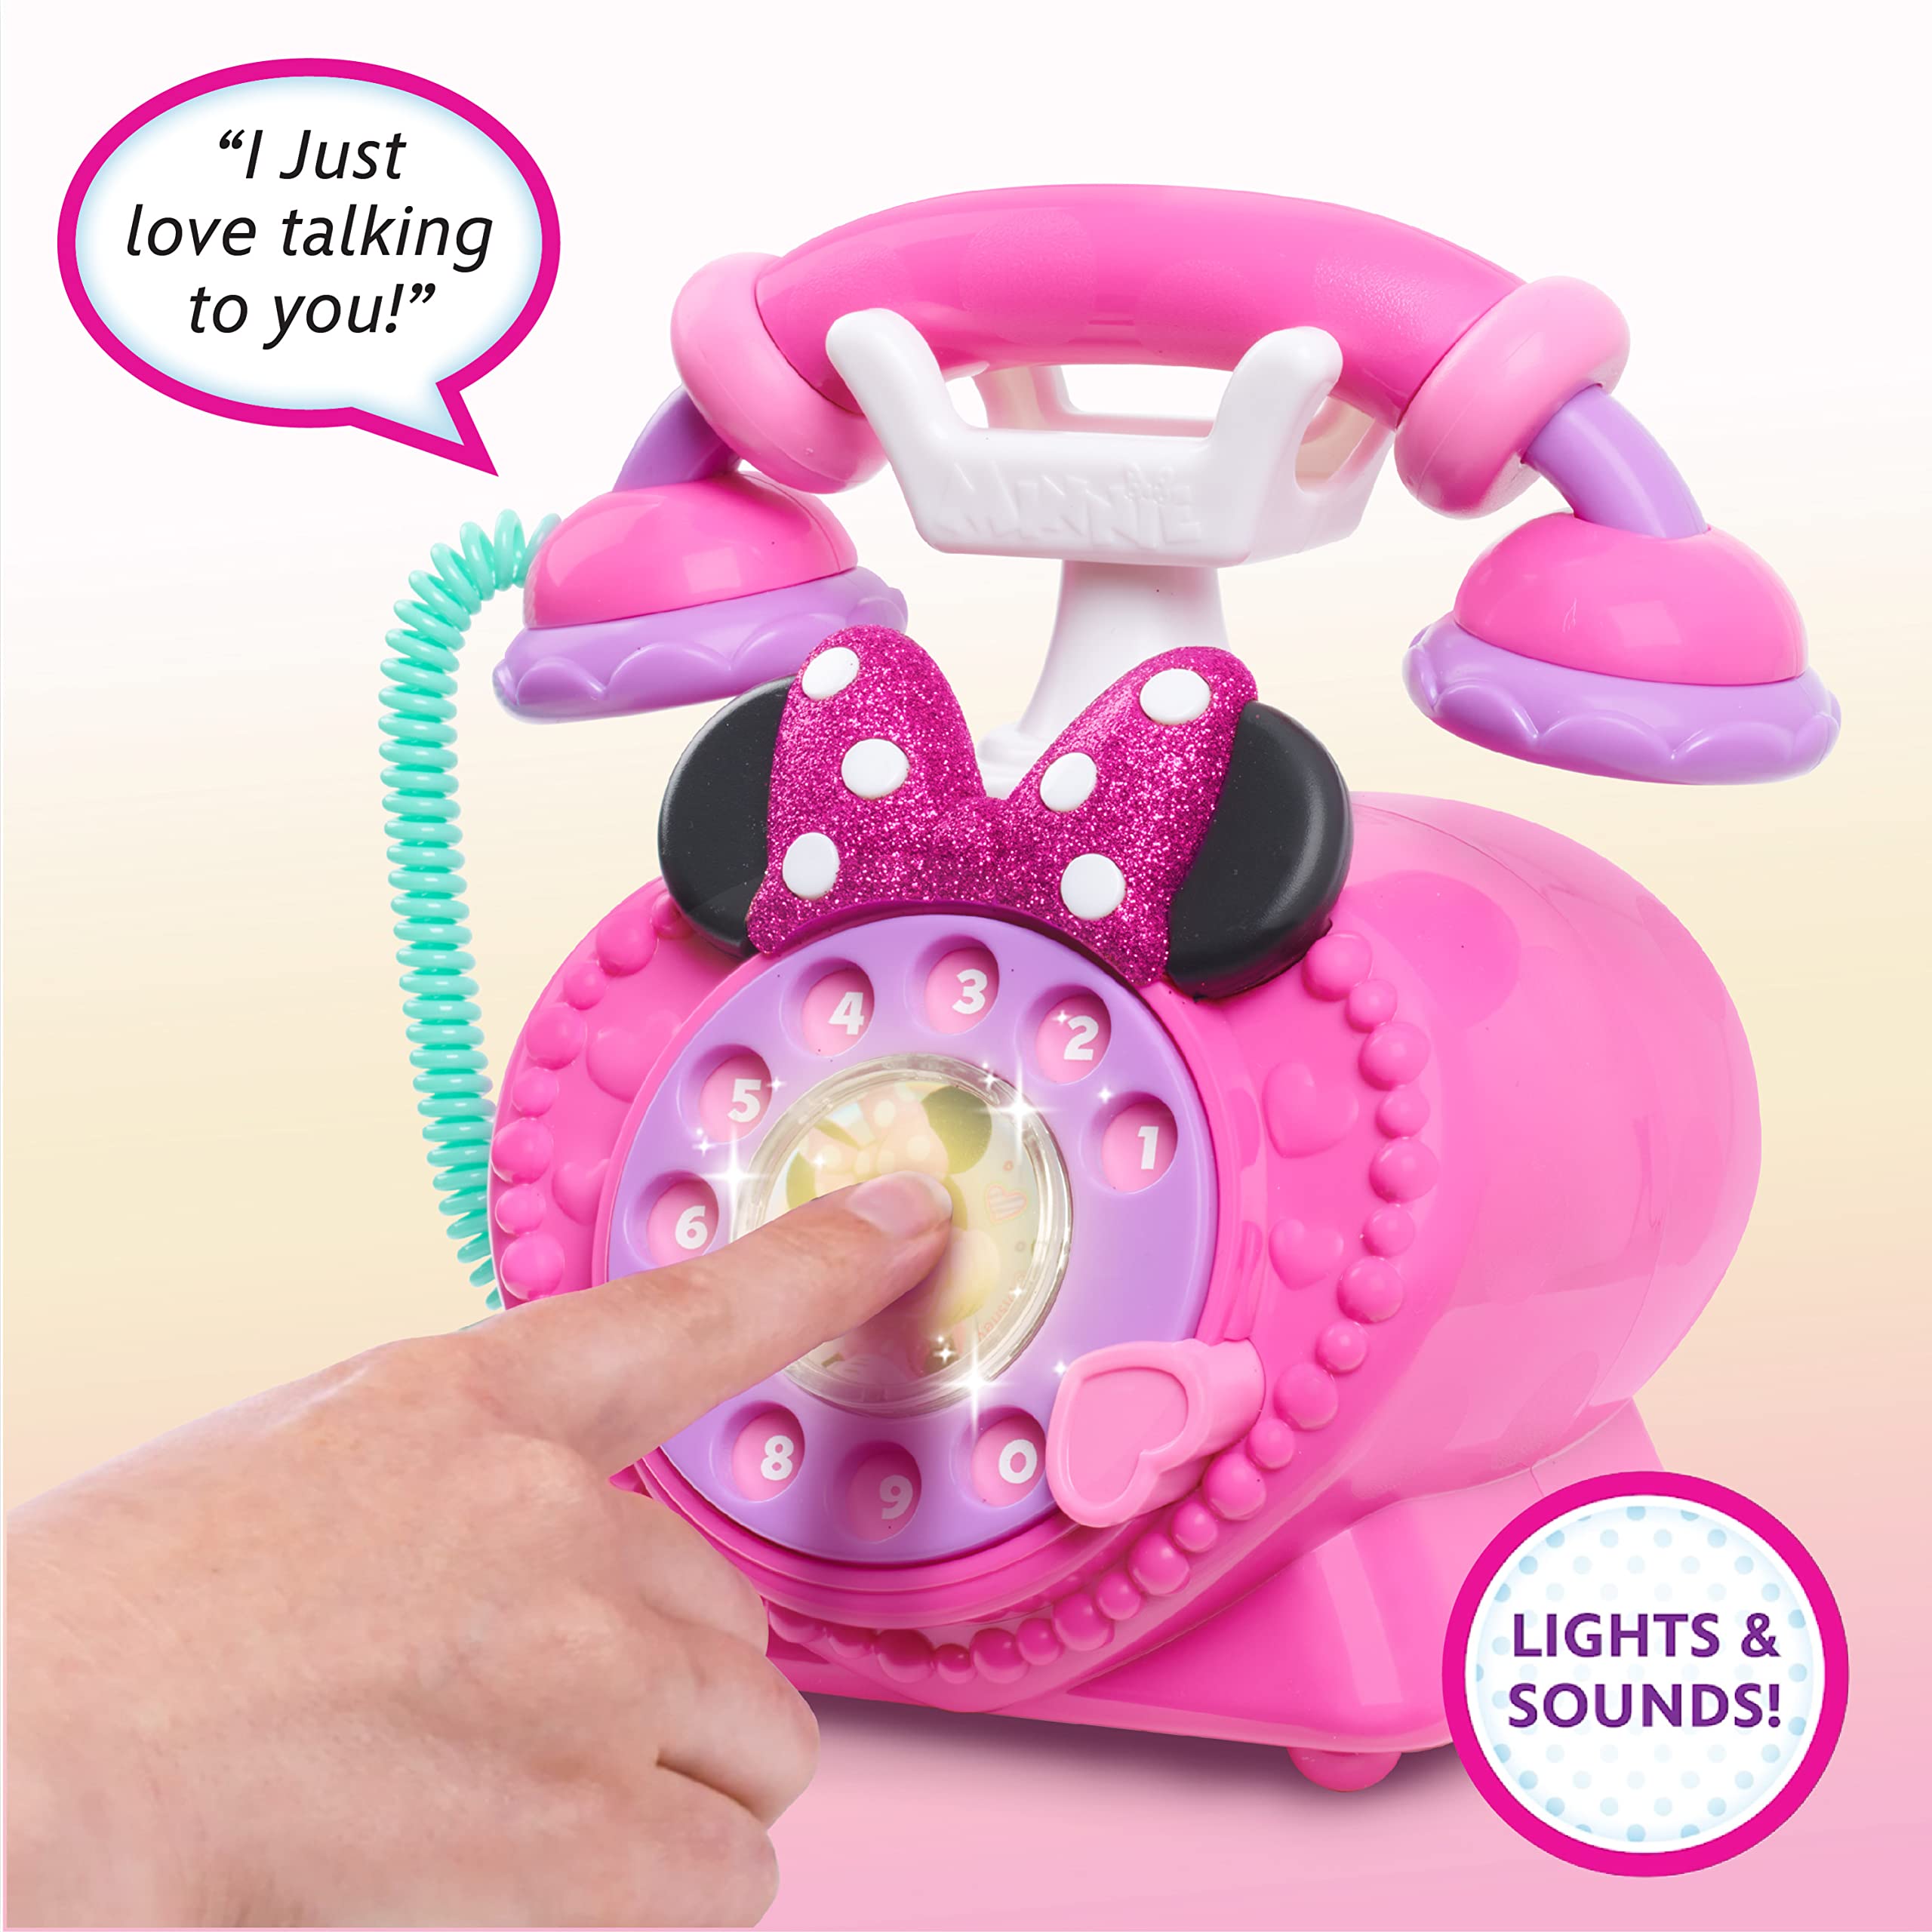 Disney Junior Minnie Mouse Ring Me Rotary Pretend Play Phone, Lights and Sounds, Officially Licensed Kids Toys for Ages 3 Up, Gifts and Presents by Just Play